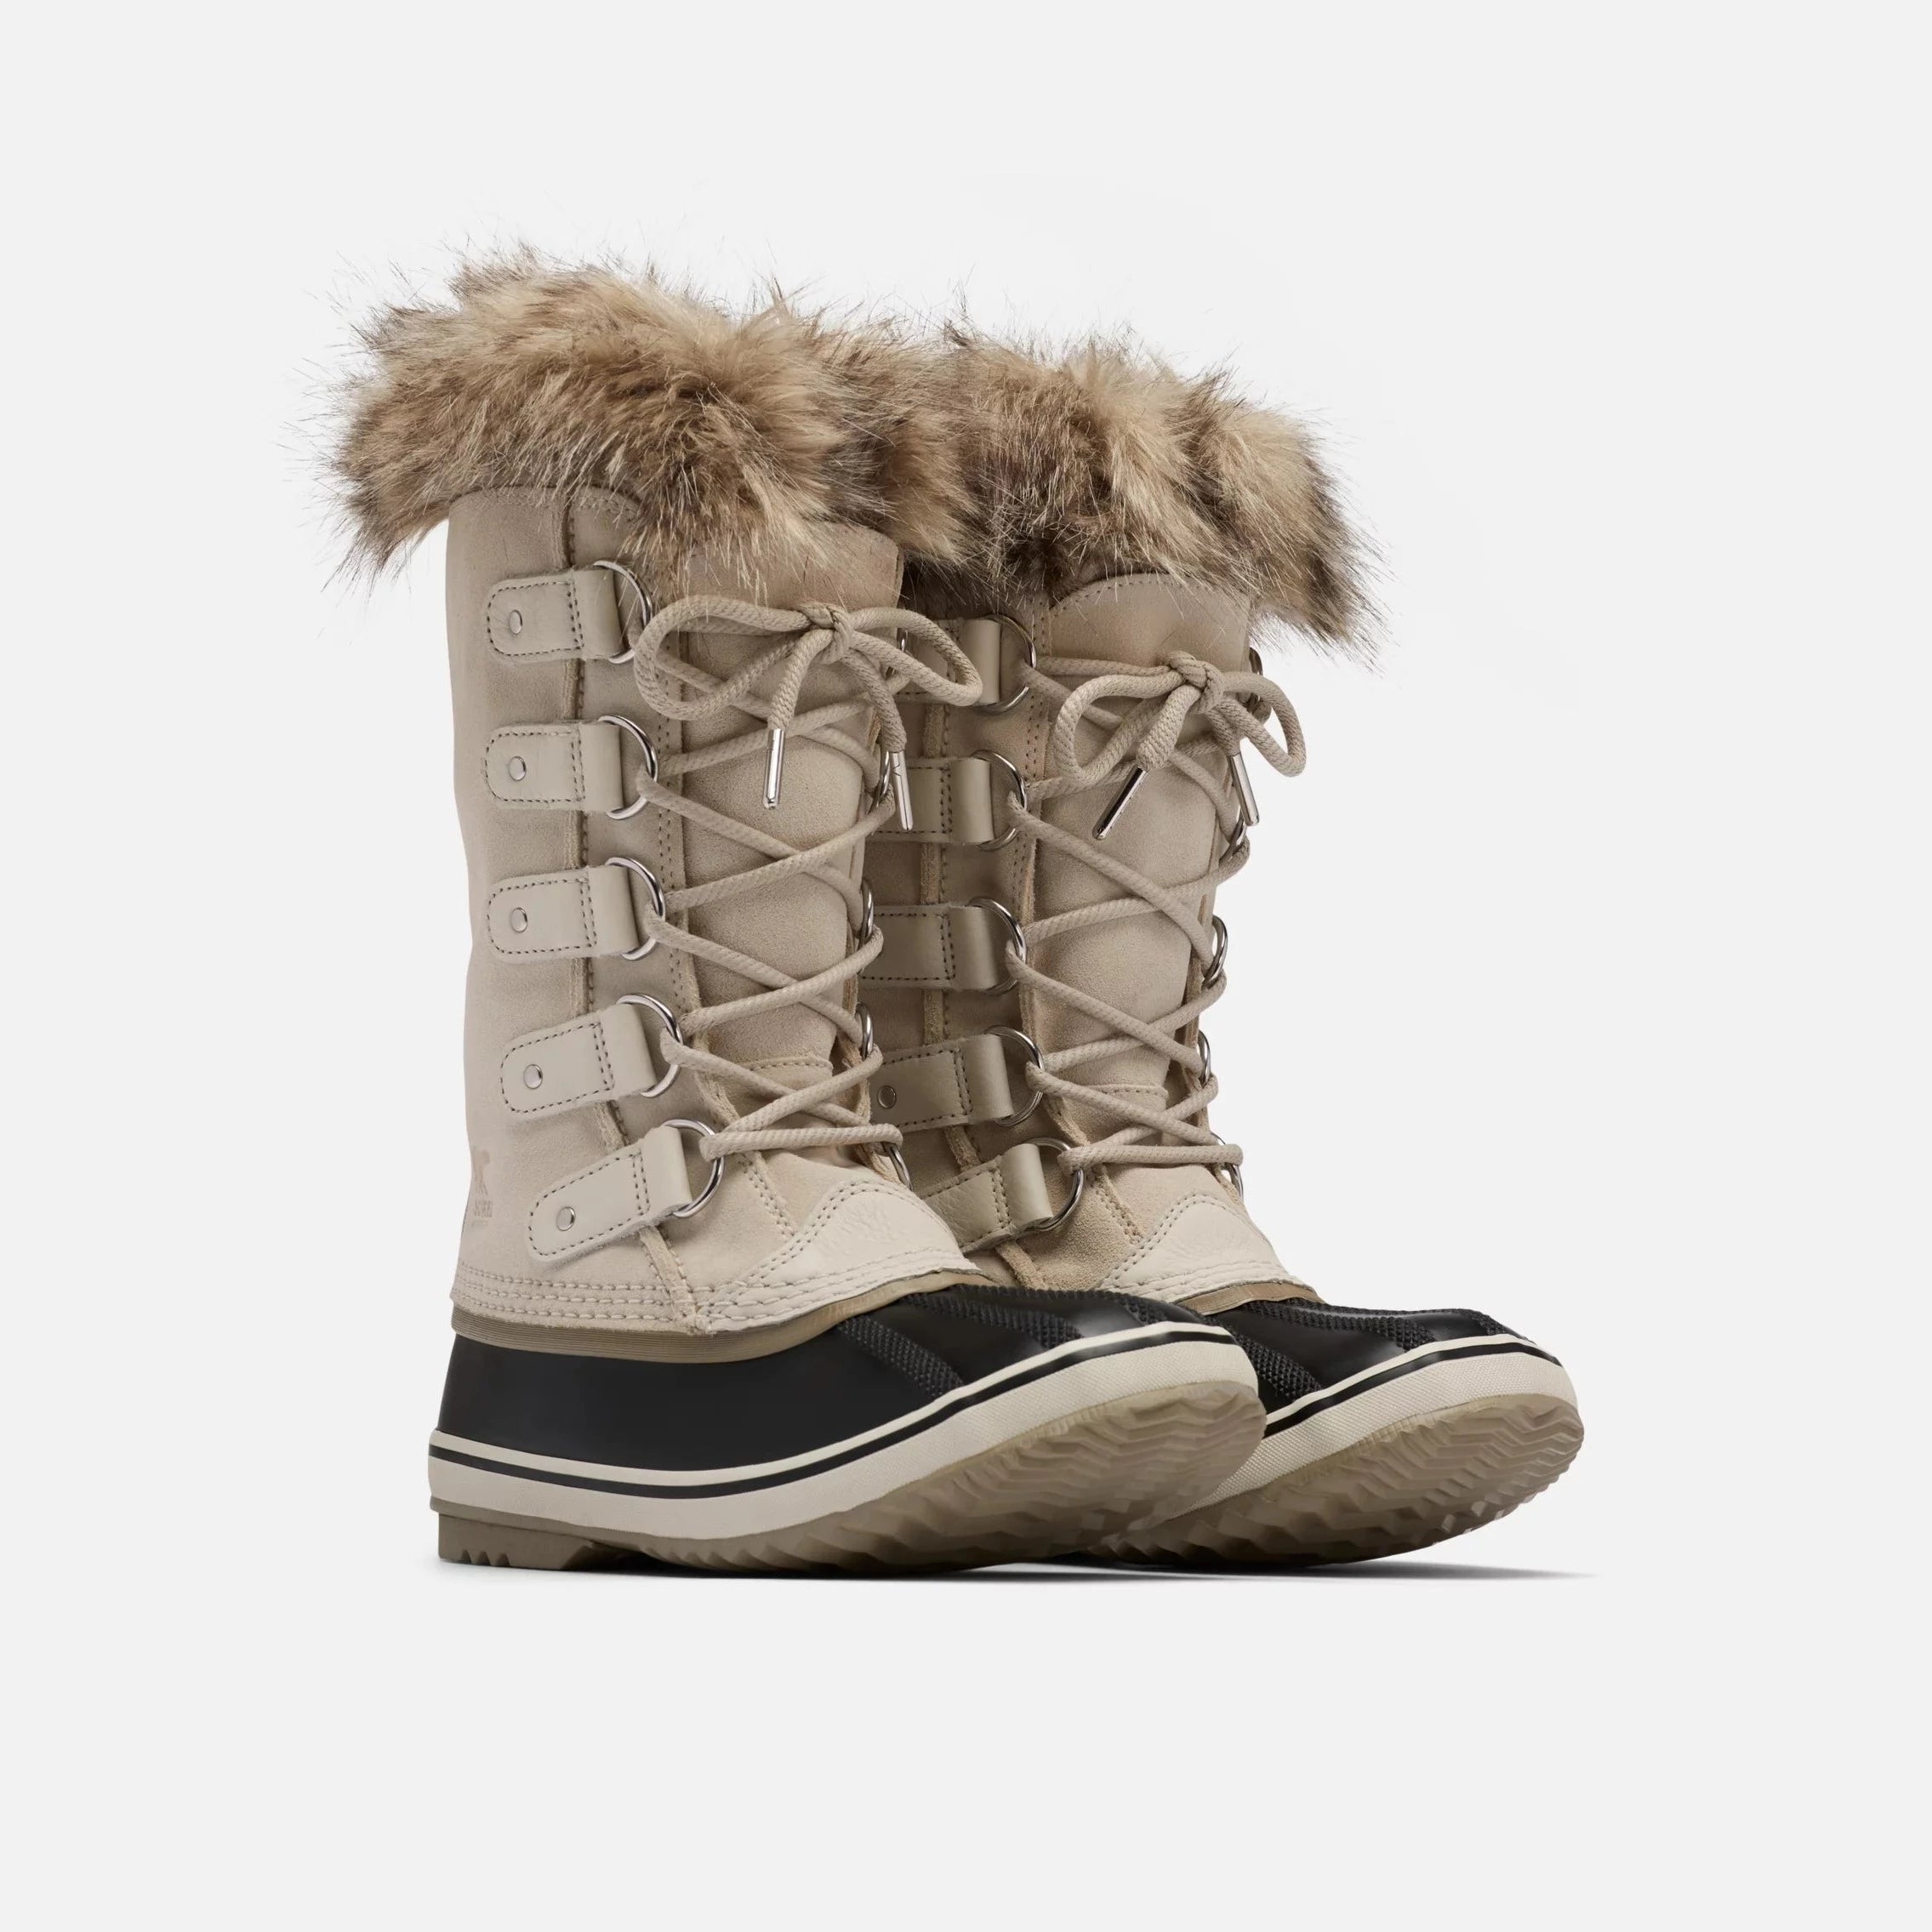 Sorel Women's Joan of Arctic Winter Boot - Fawn/Omega Taupe